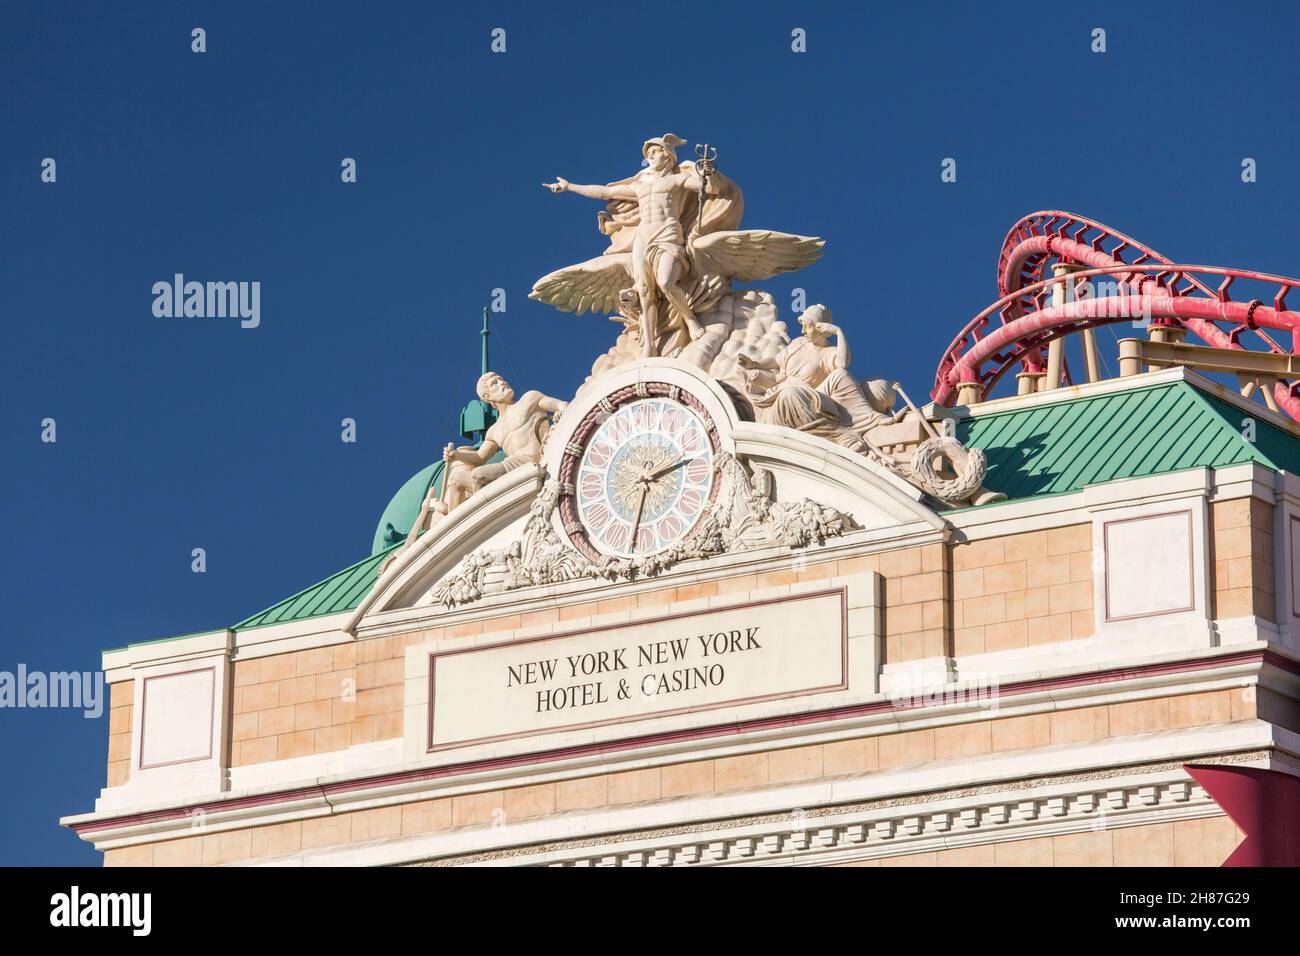 Las Vegas, Nevada, USA. Replica of Grand Central Station clock and 'Glory of Commerce' sculpture on façade of the New York-New York Hotel and Casino. Stock Photo